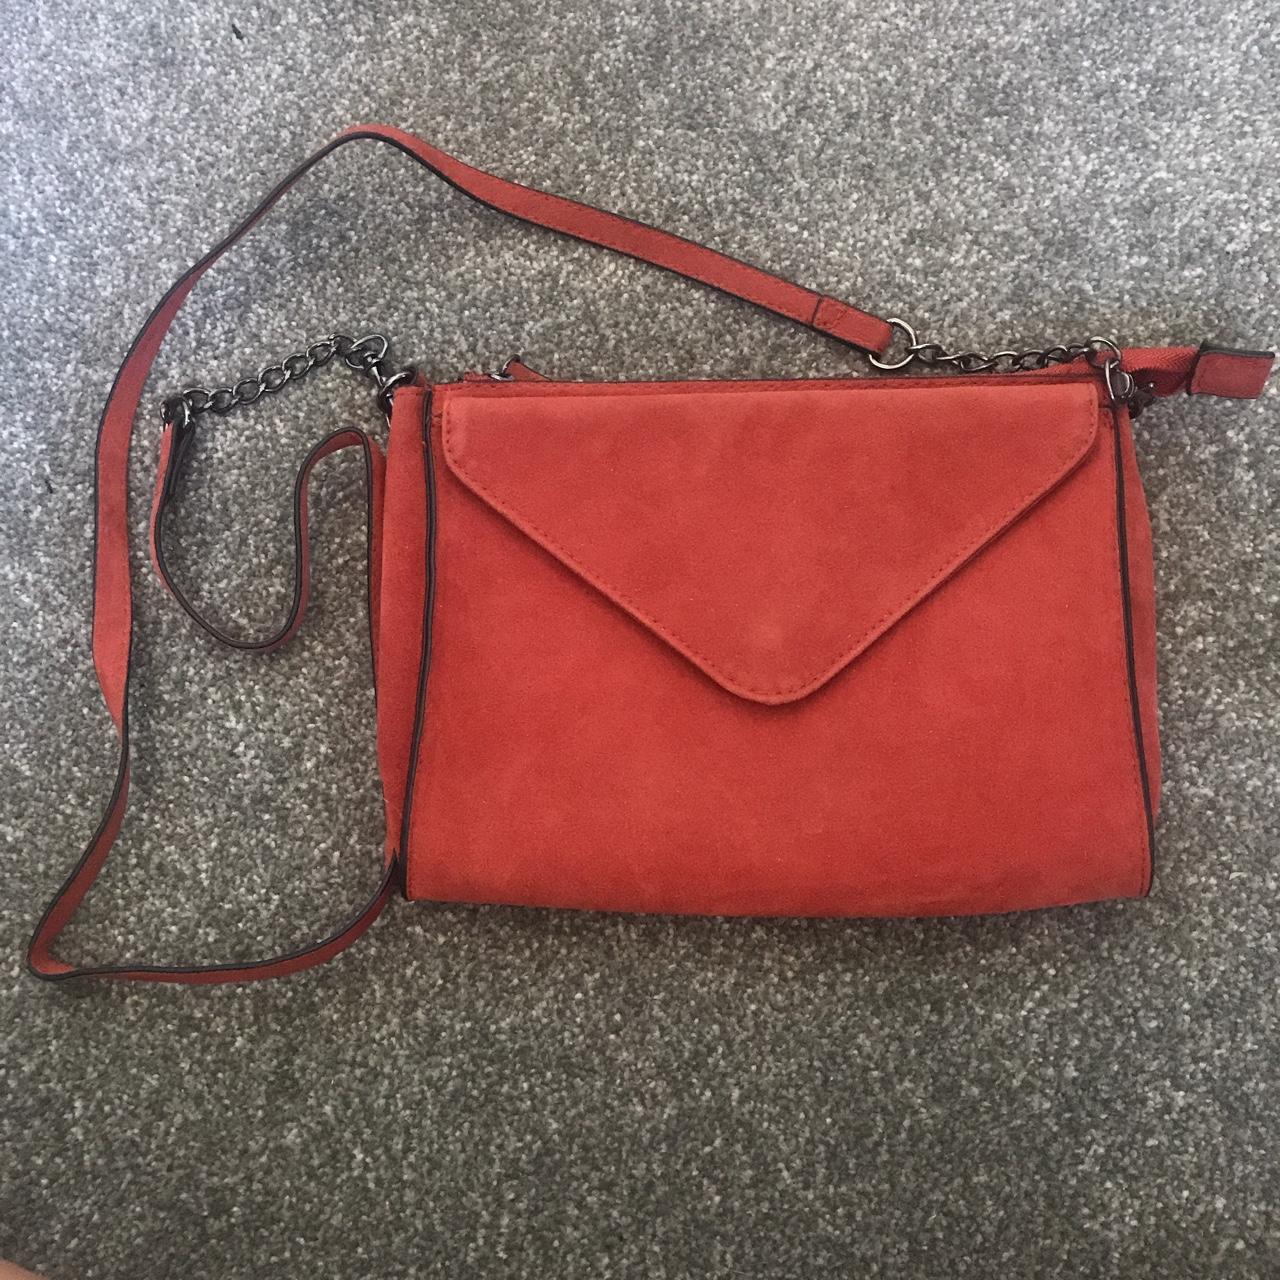 Matalan clutch bag - straps can be added to make... - Depop